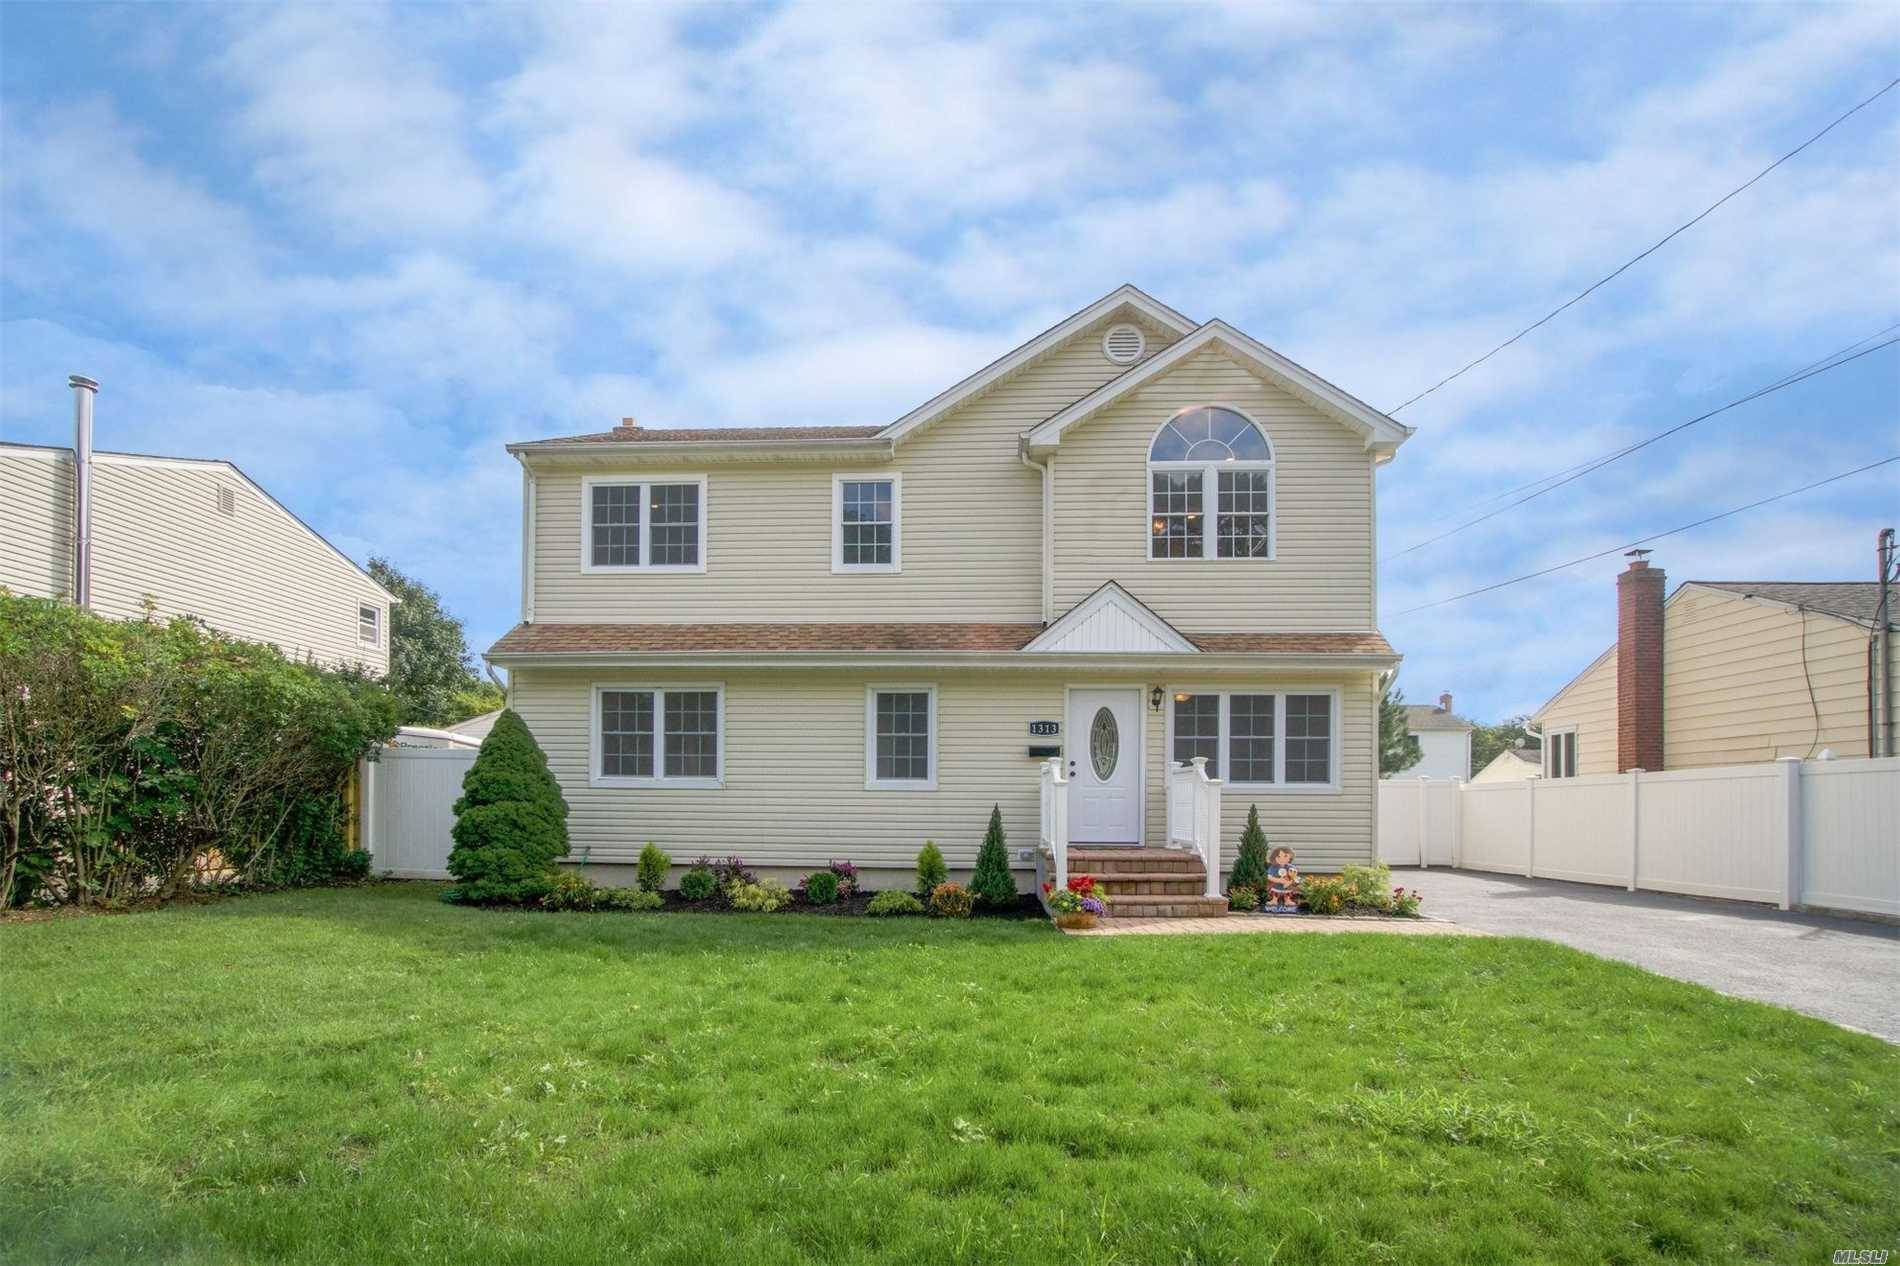 This Beautiful Totally Renovated & Spacious Colonial Boasts 4 Bedrooms, 4 Full Baths, Hw Floors Throughout.